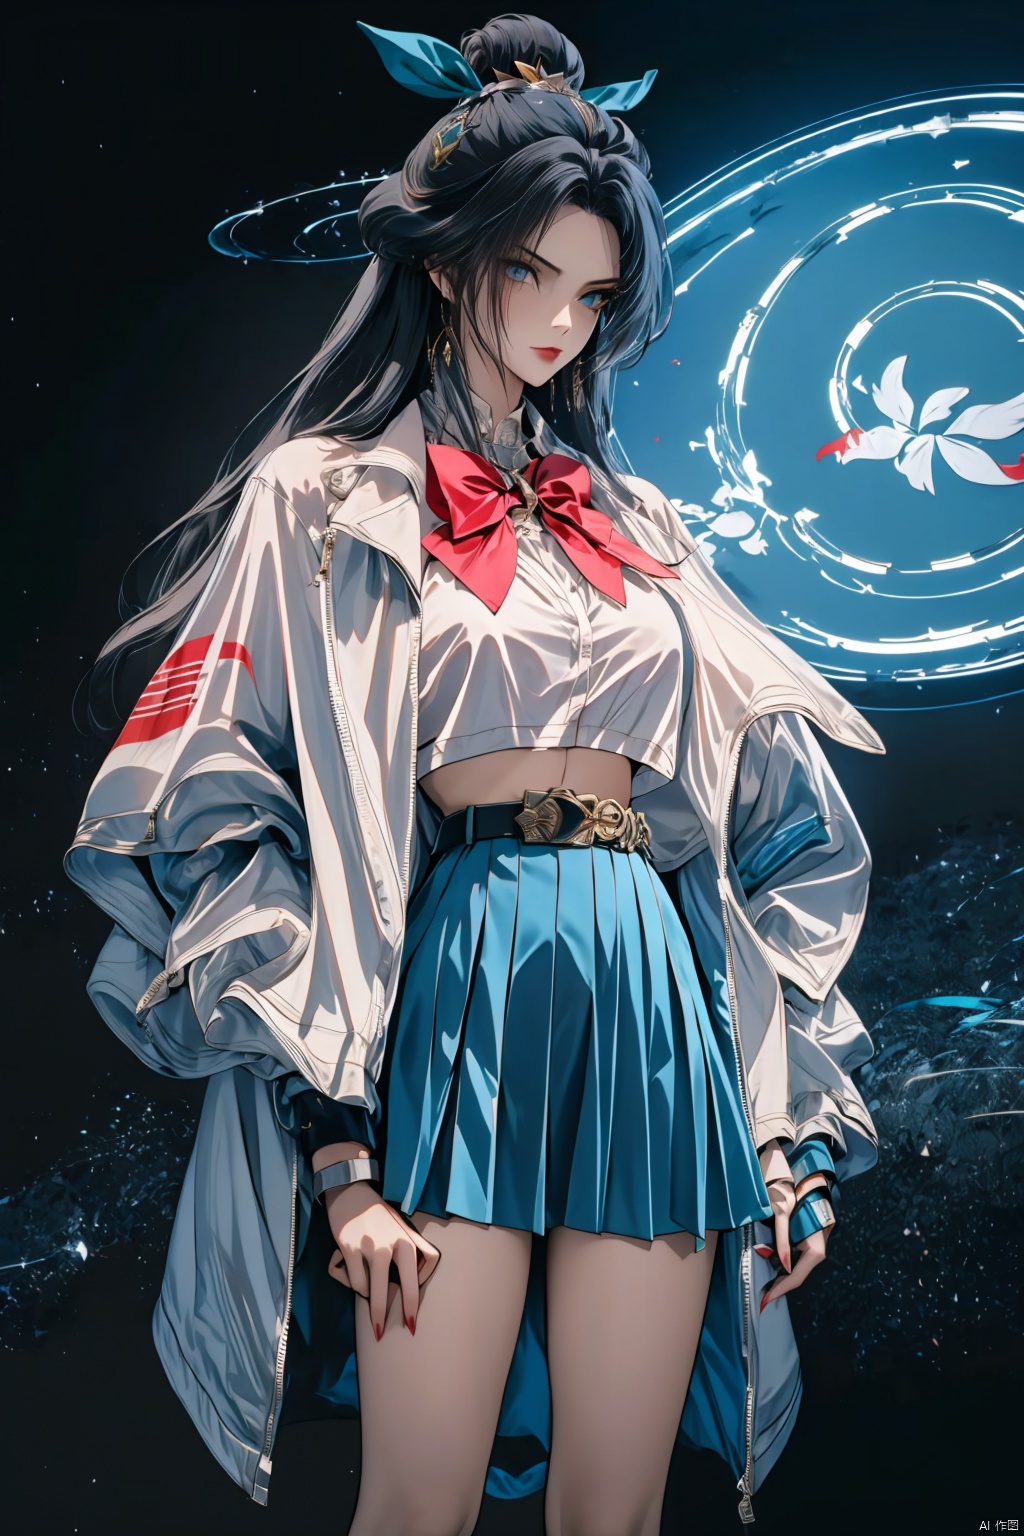  Long hair, light blue hair, pink streaks of hair, space bun hairstyle, flower hairpin, blue eyes, long-sleeve, button-up white shirt, a gray jacket with blue-green stripes, a red bow, dark blue-green pleated skirt, school background, add_detail:1, add_detail:0, add_detail:0.5， no cloth, cute girl